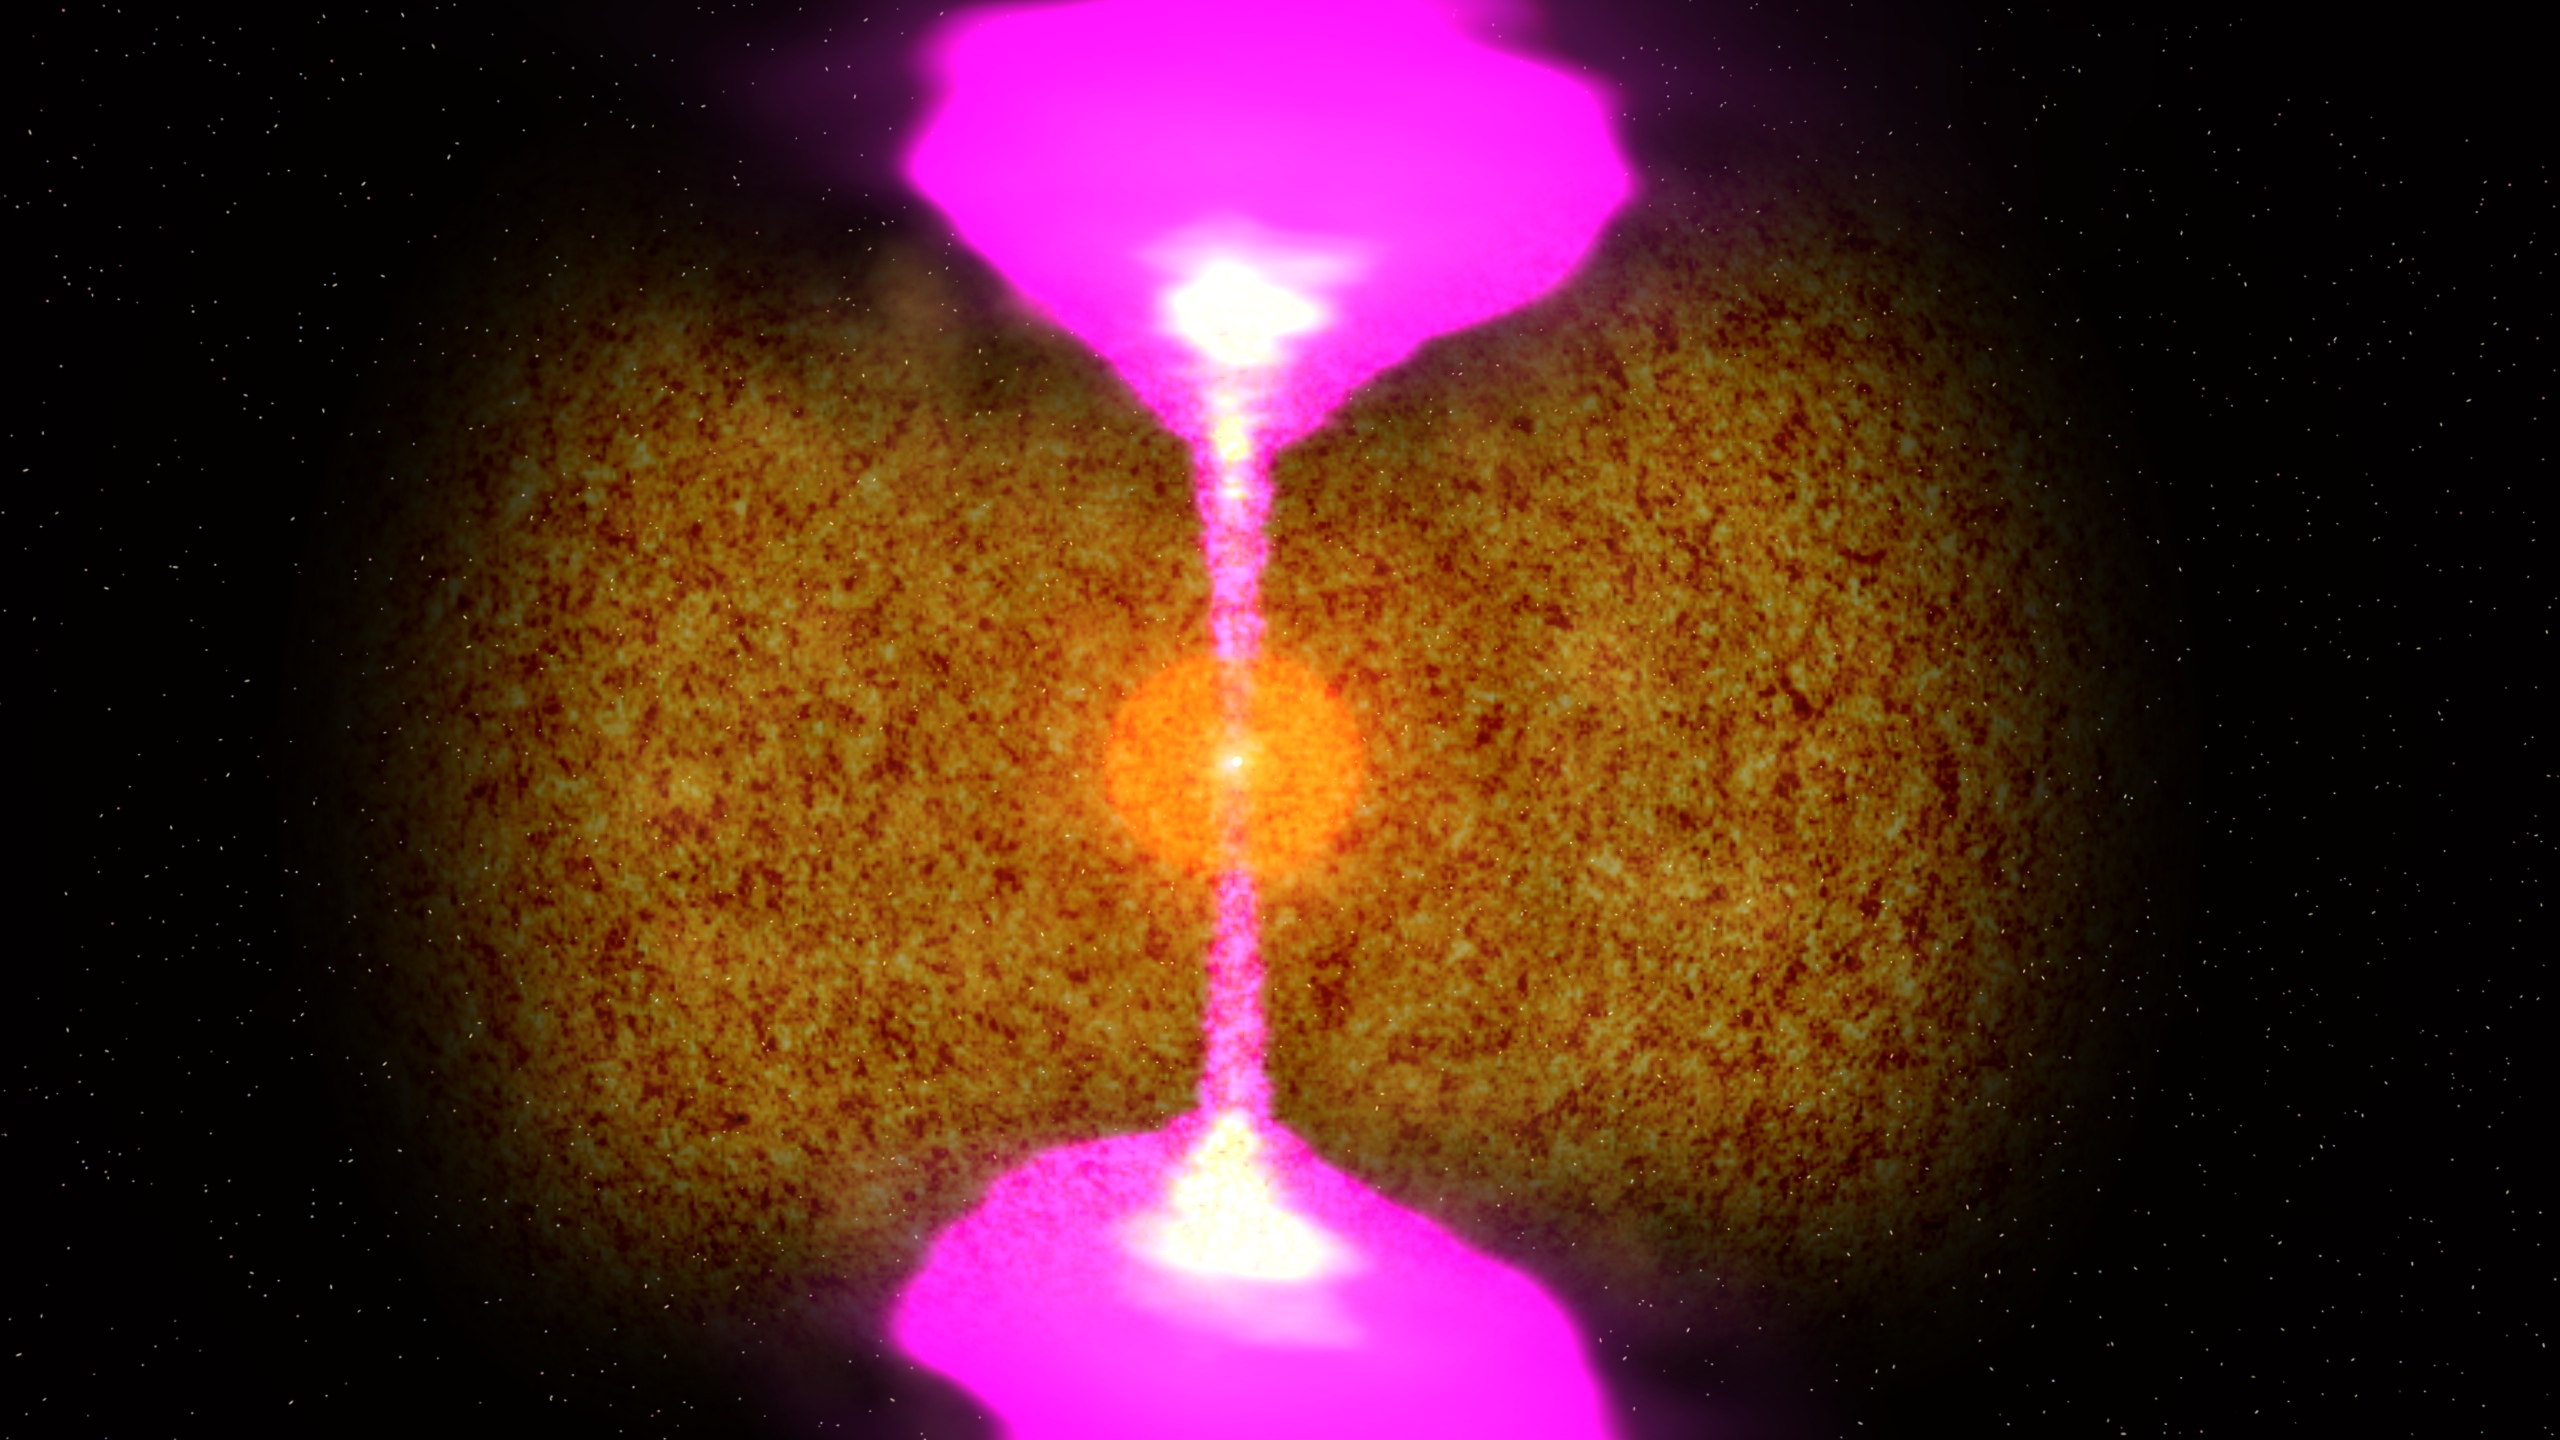 These animations illustrate two wildly different explanations for GRB 101225A, better known as the "Christmas burst." First, a solitary neutron star in our own galaxy shreds and accretes an approaching comet-like body. In the second, a neutron star is engulfed by, spirals into and merges with an evolved giant star in a distant galaxy.For complete transcript, click here.